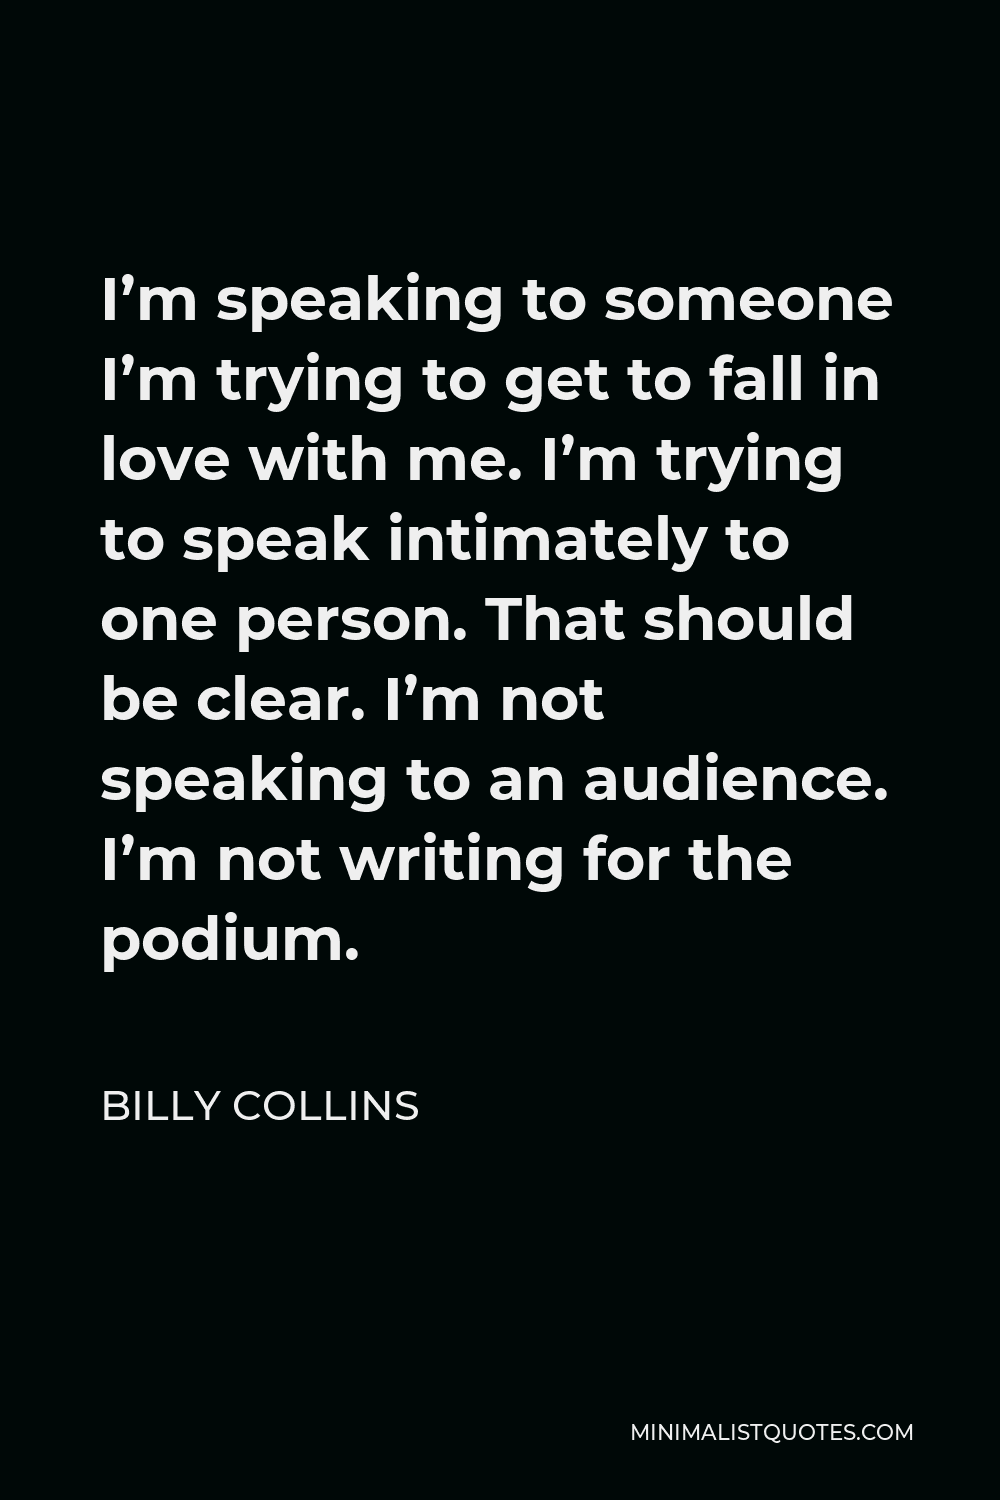 Billy Collins Quote - I’m speaking to someone I’m trying to get to fall in love with me. I’m trying to speak intimately to one person. That should be clear. I’m not speaking to an audience. I’m not writing for the podium.